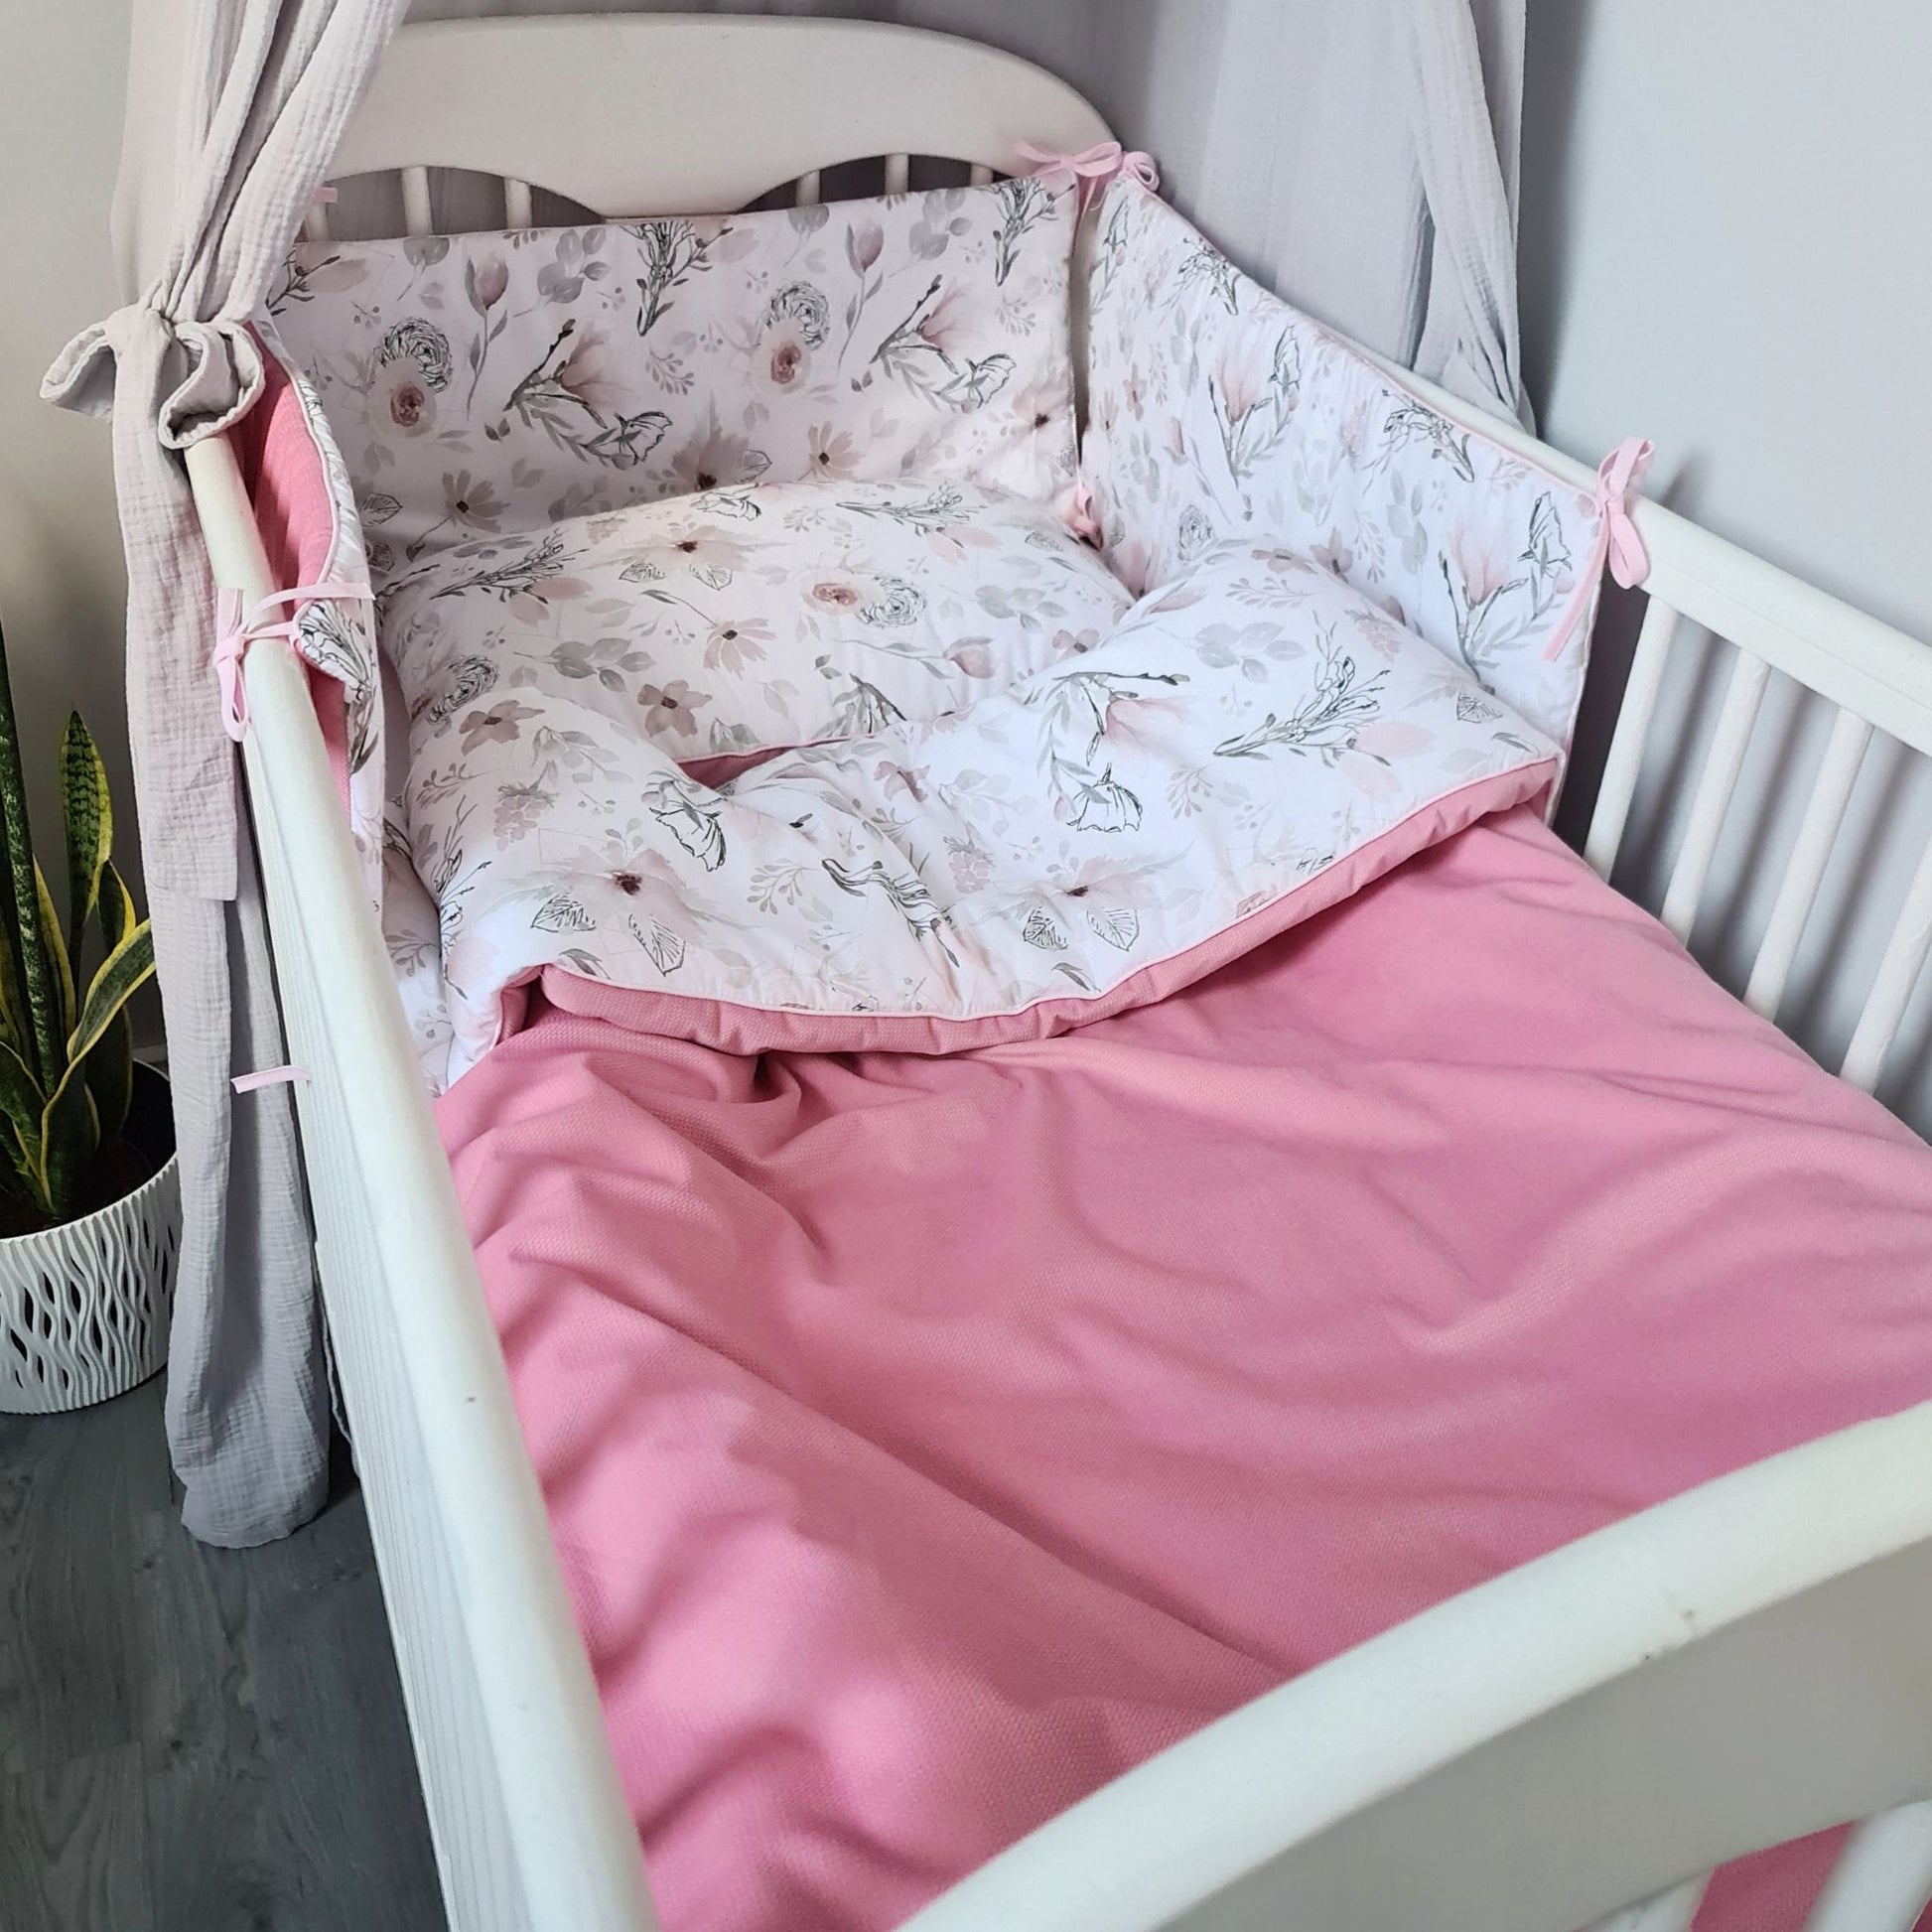 baby and toddler size bedding sets duvet and pillow pink